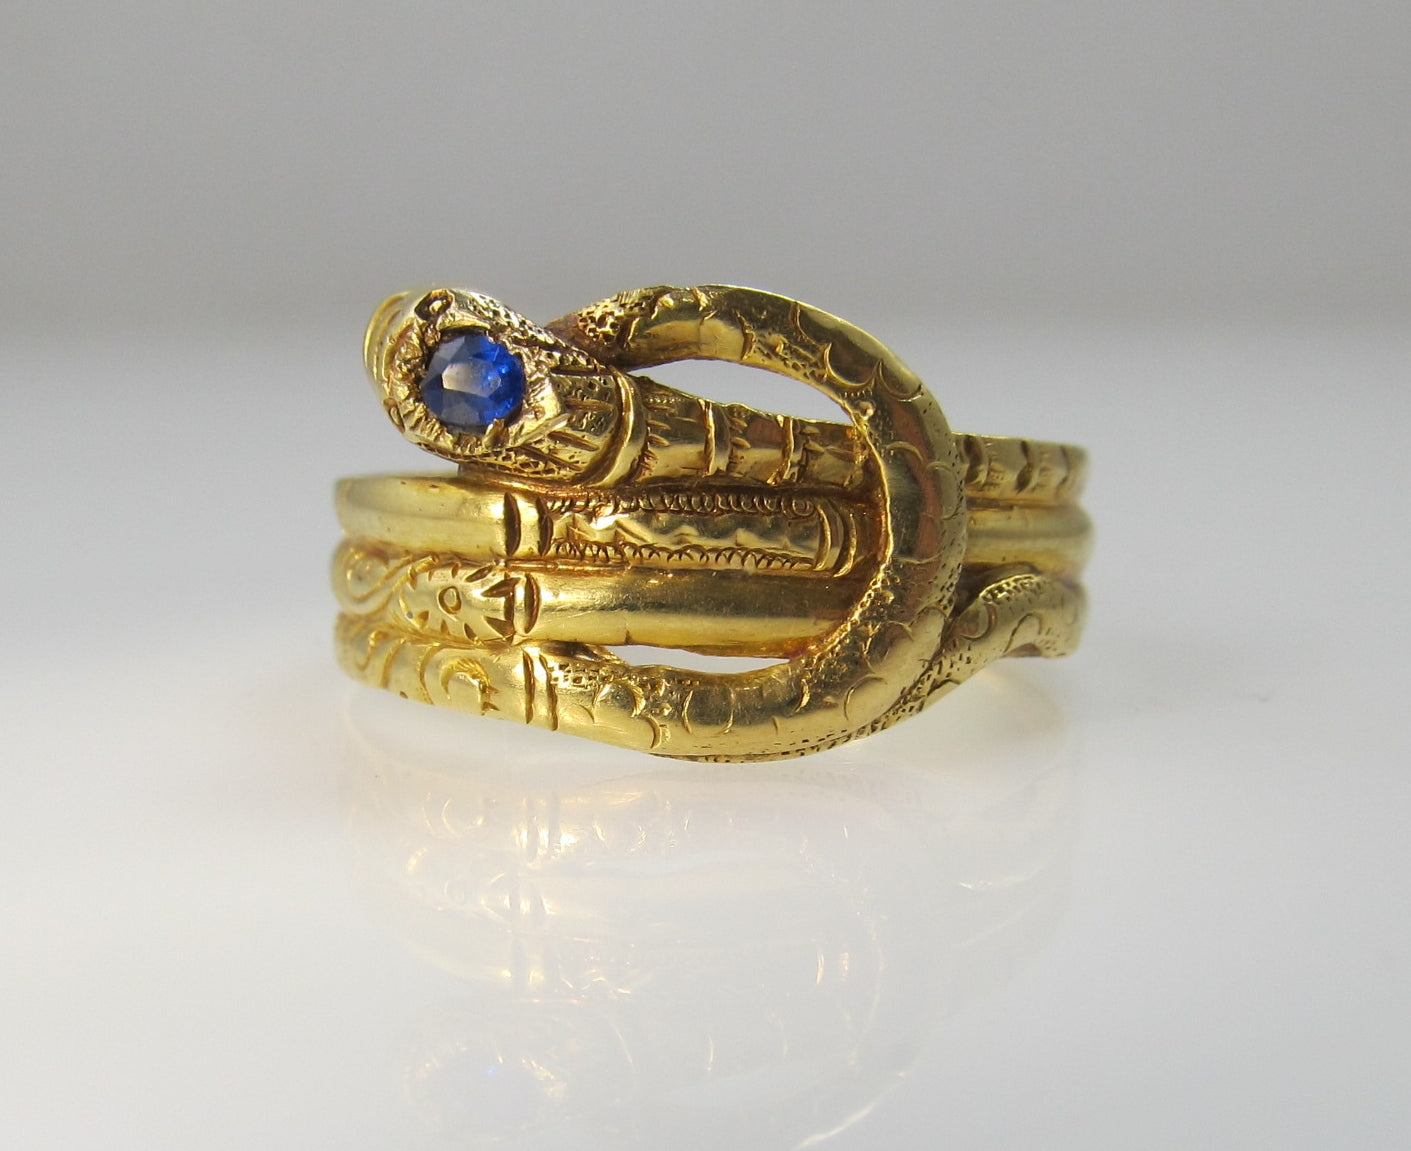 Early Victorian 14k wrapped snake ring with a sapphire